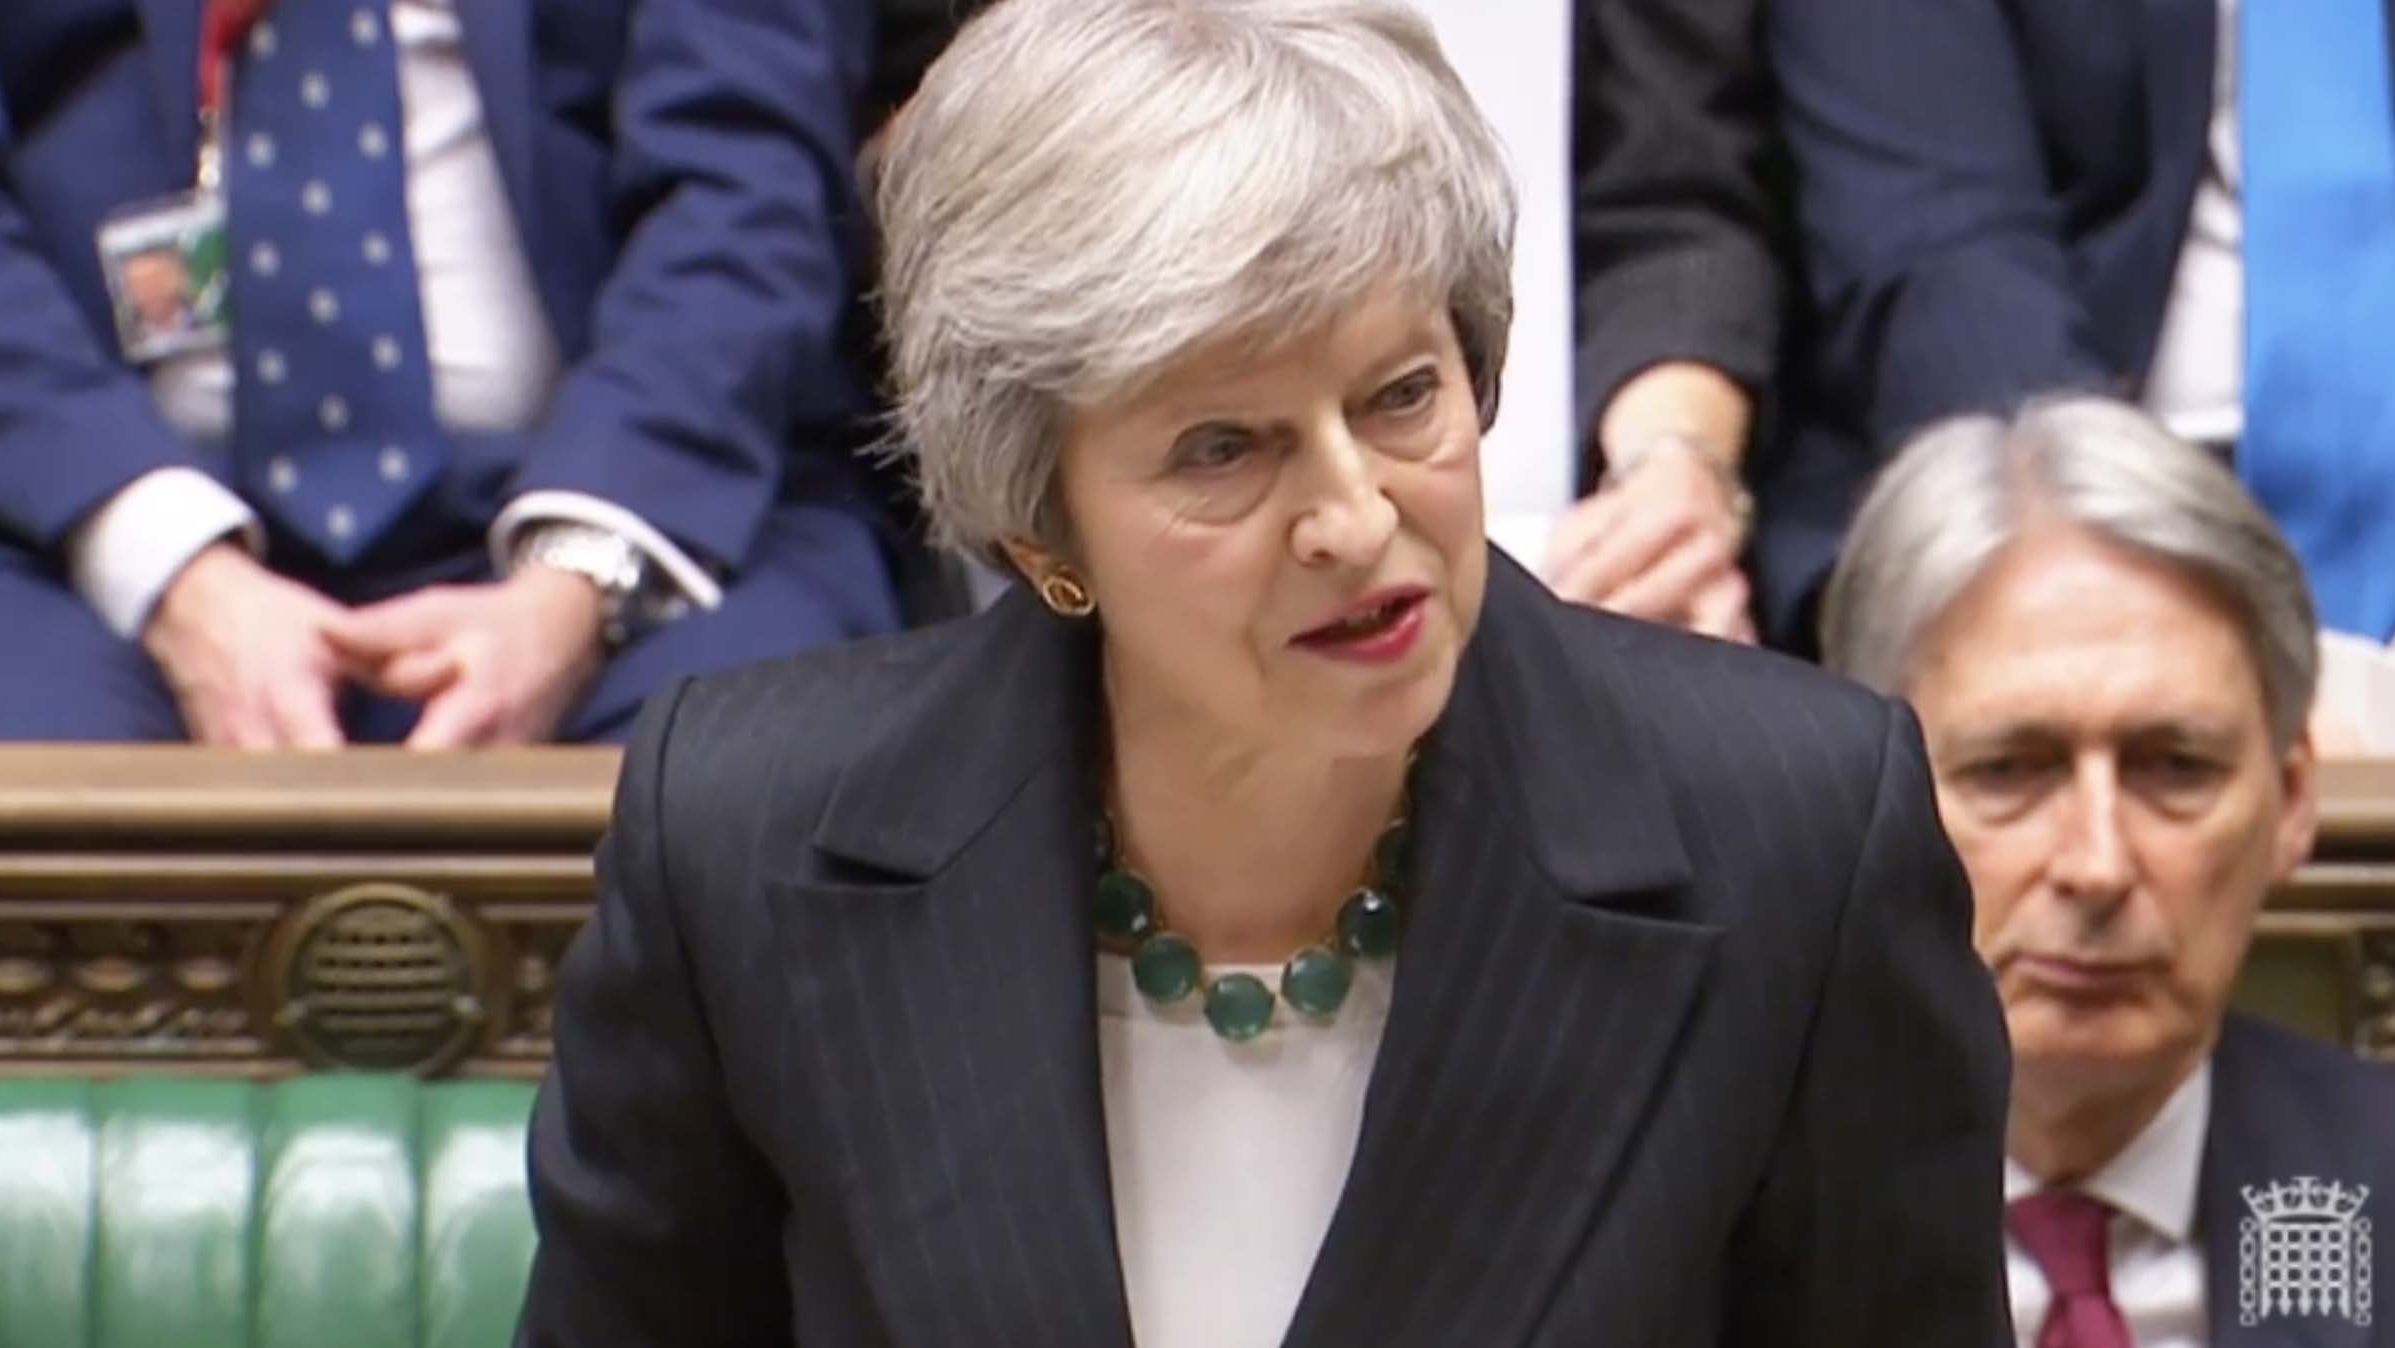 UK Prime Minister takes questions from members of Parliament about the draft Brexit deal on Thursday.